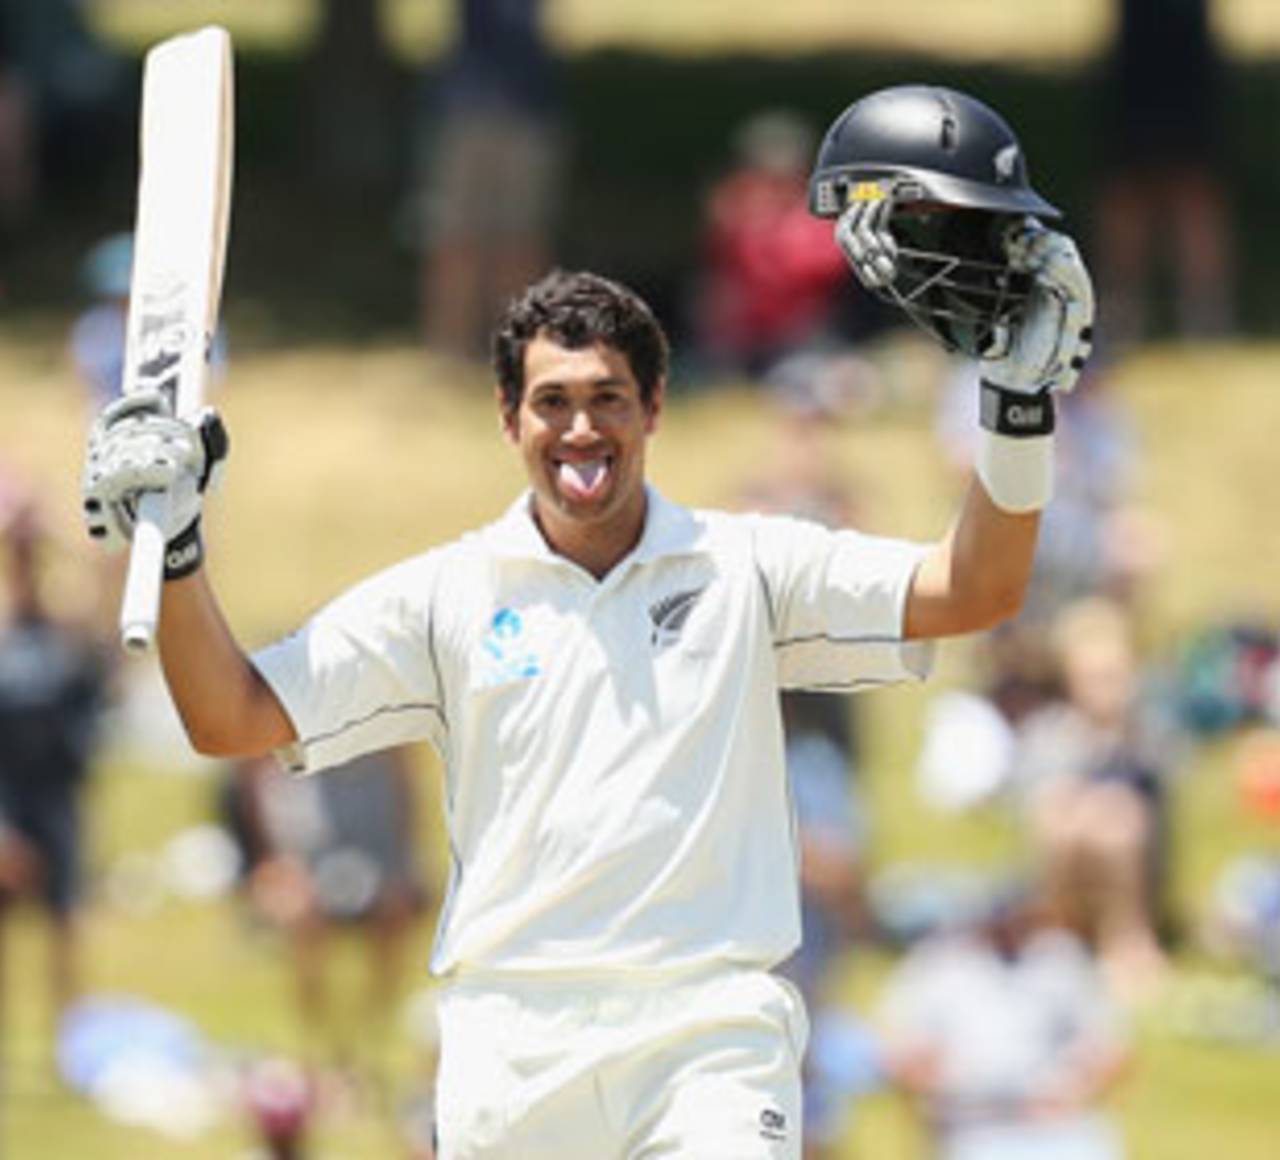 Ross Taylor celebrates a century in his own inimitable style, New Zealand v West Indies, 3rd Test, Hamilton, 3rd day, December 21, 2013